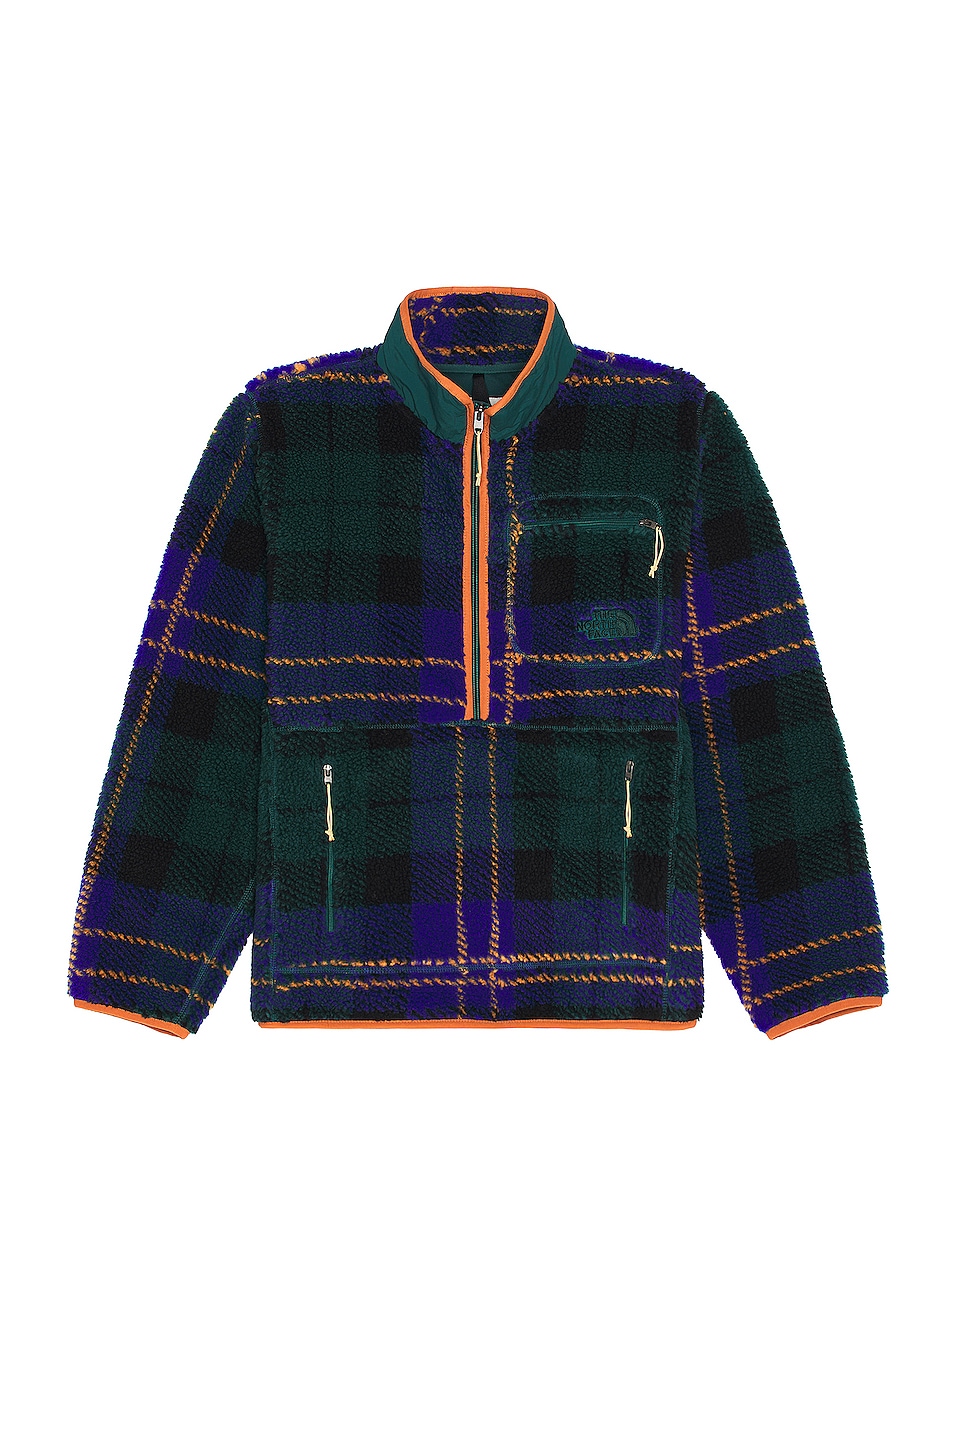 Image 1 of The North Face Jacquard Extreme Pile Pullover in Ponderosa Green Large Half Dome Plaid Print